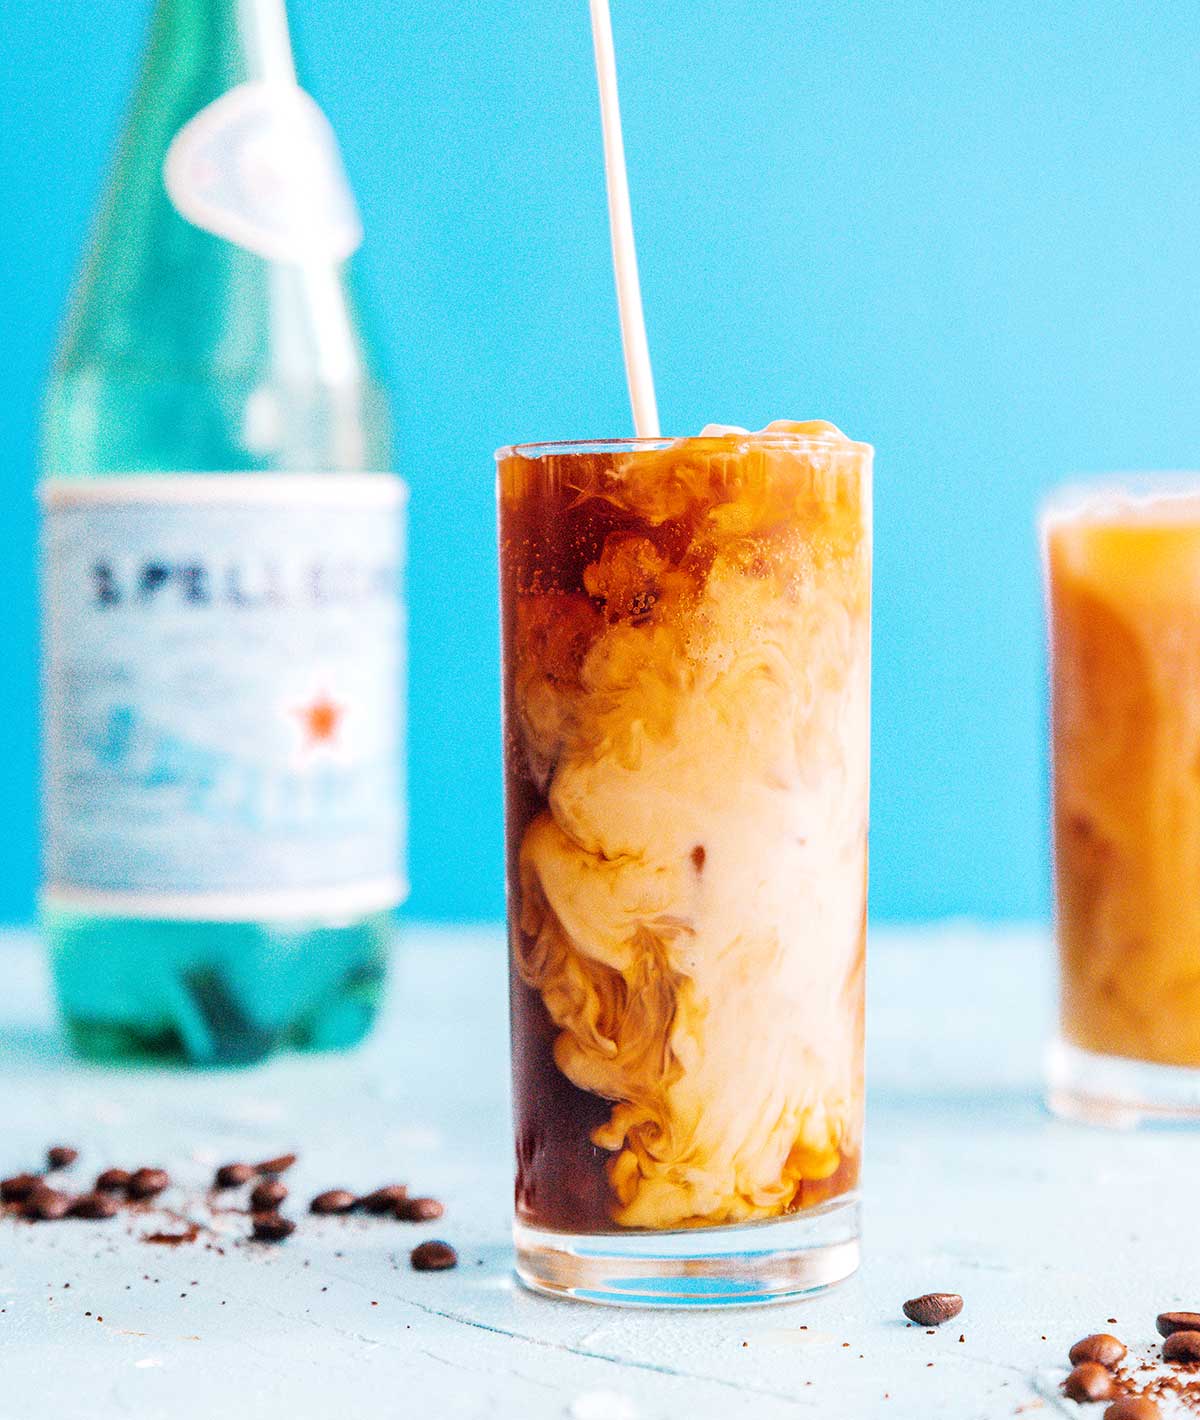 Fizzy cold brew coffee with cream in a glass